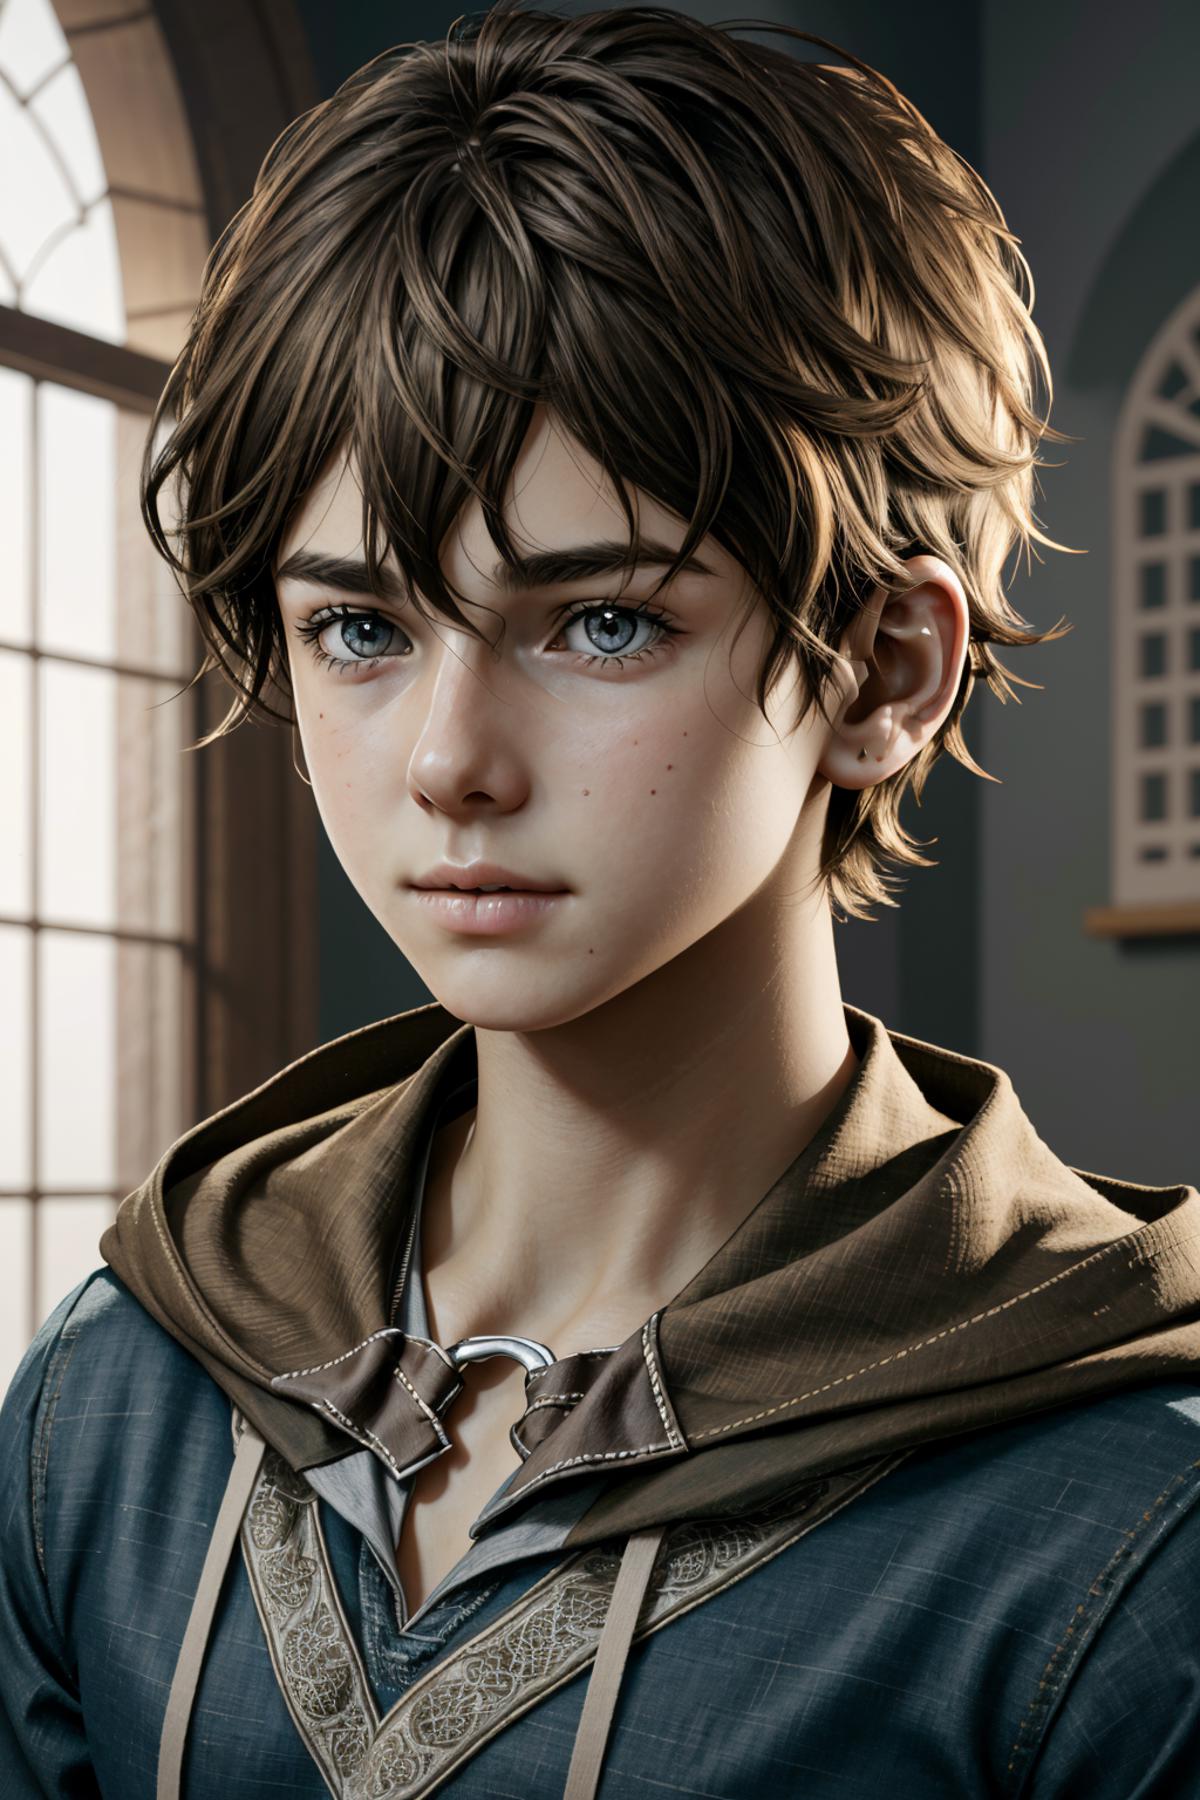 Lucas from A Plague Tale image by BloodRedKittie